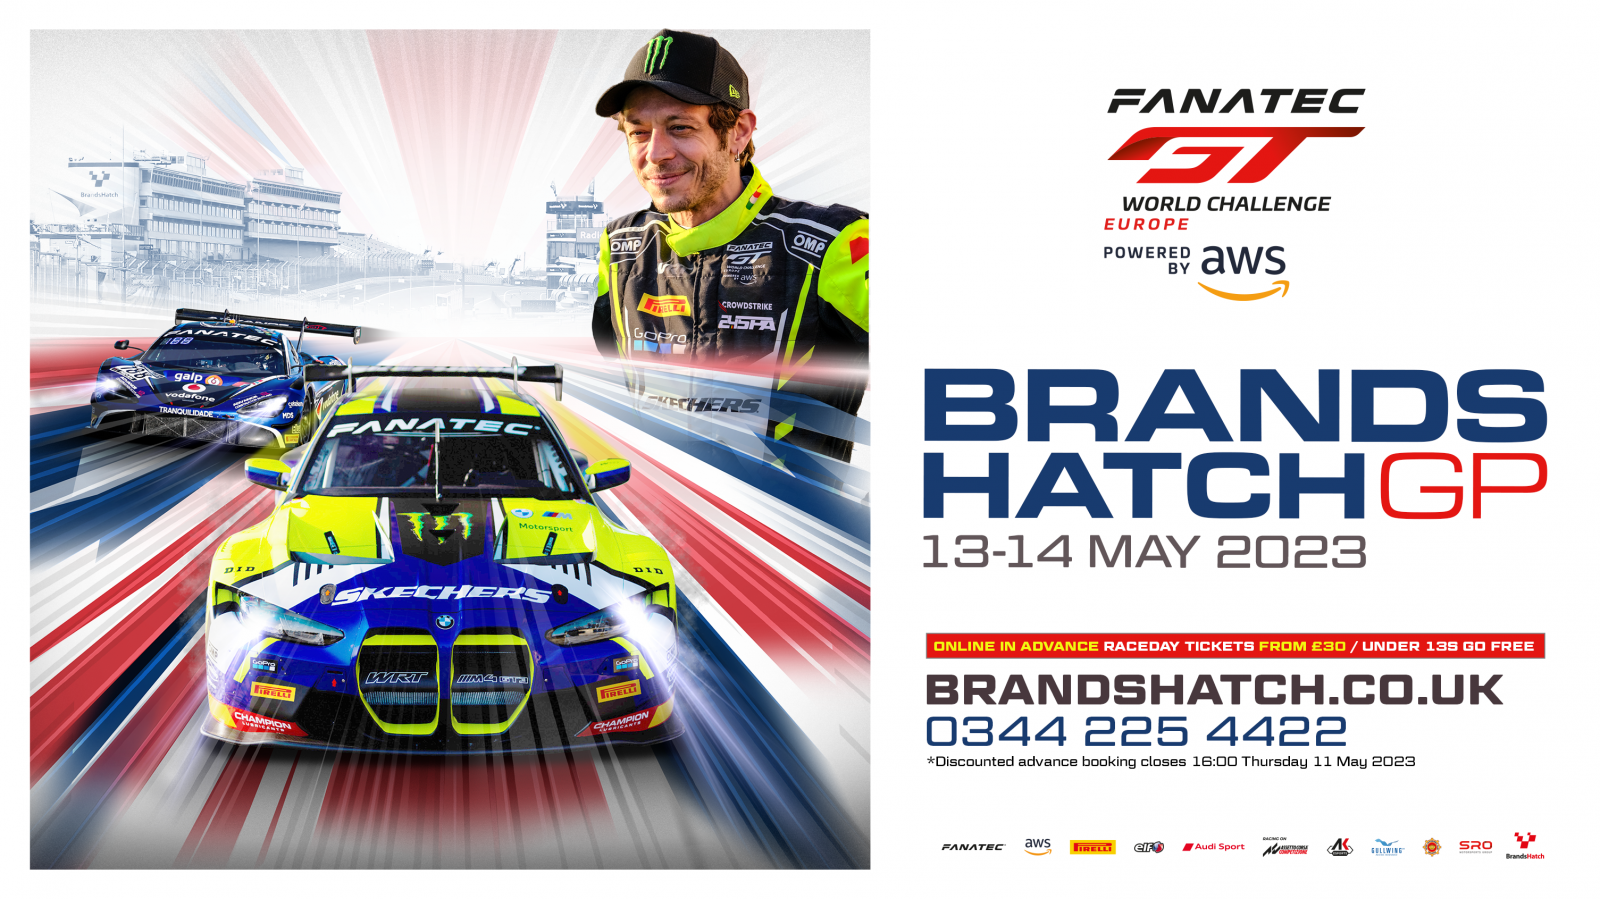 Stacked 29-car grid ready to launch Fanatec GT Europe Sprint Cup campaign at Brands Hatch 